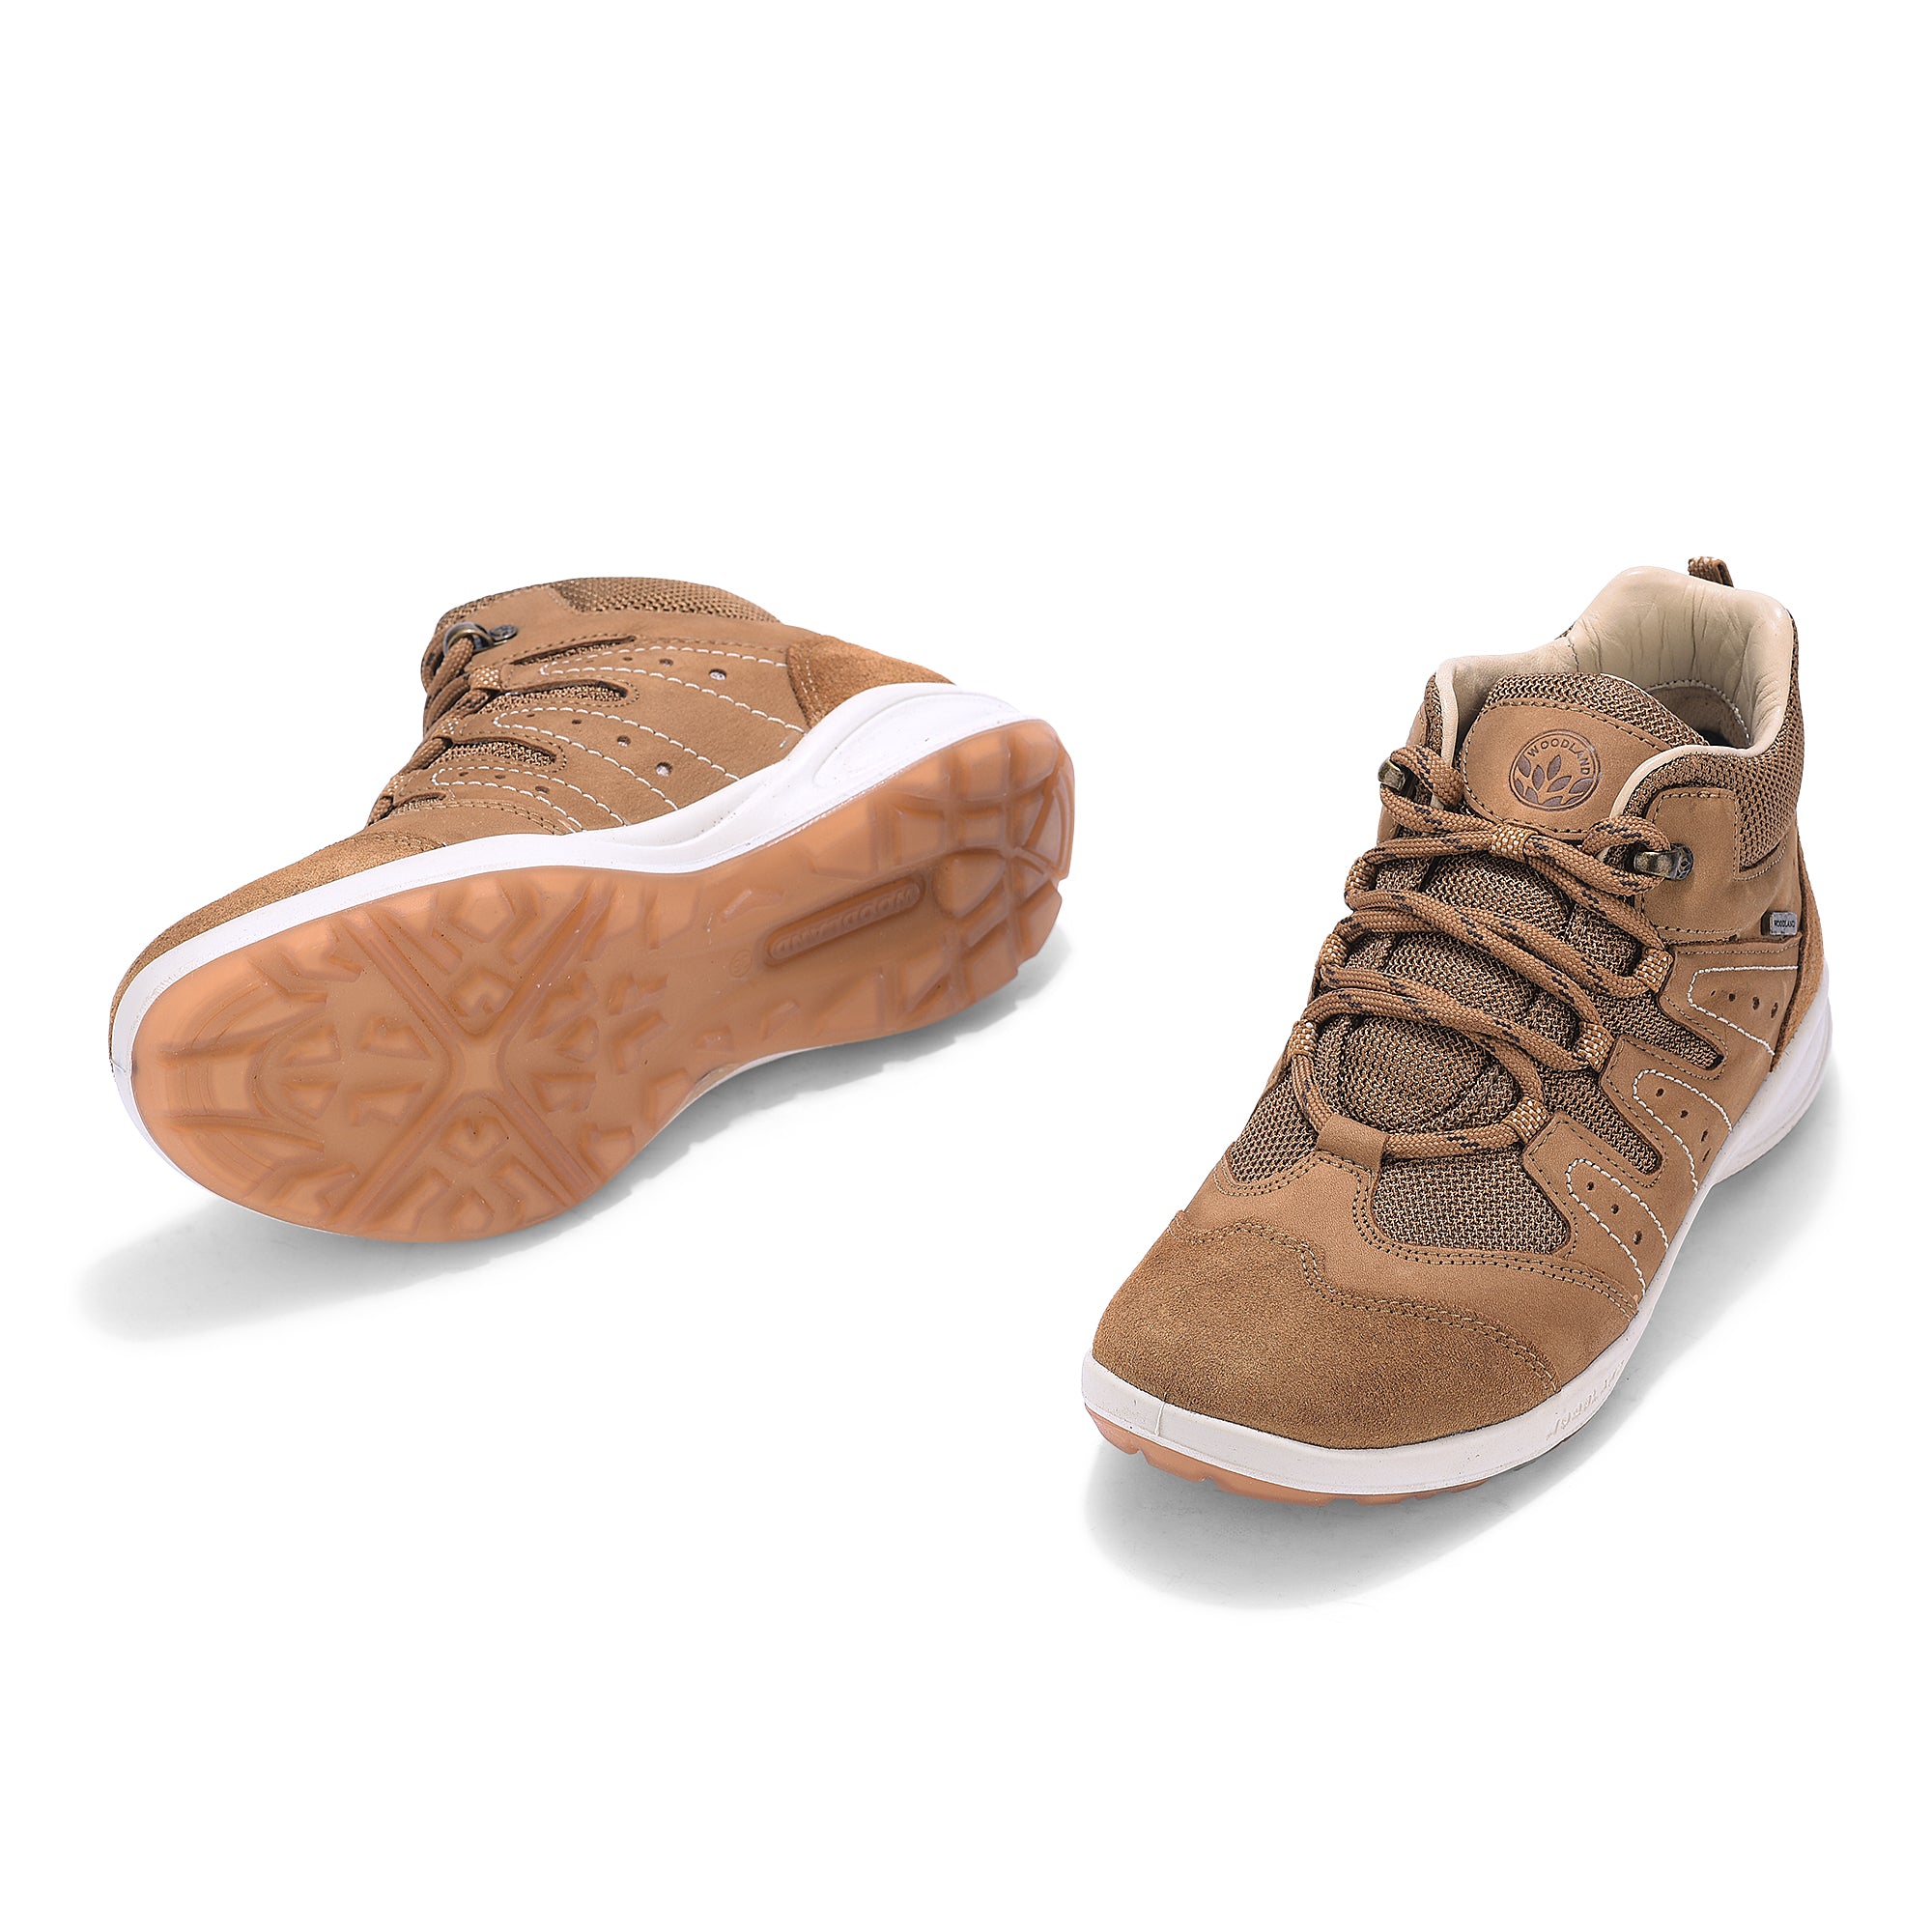 Original Woodland Women's Leather Soft Sneakers (#2639117_Camel)